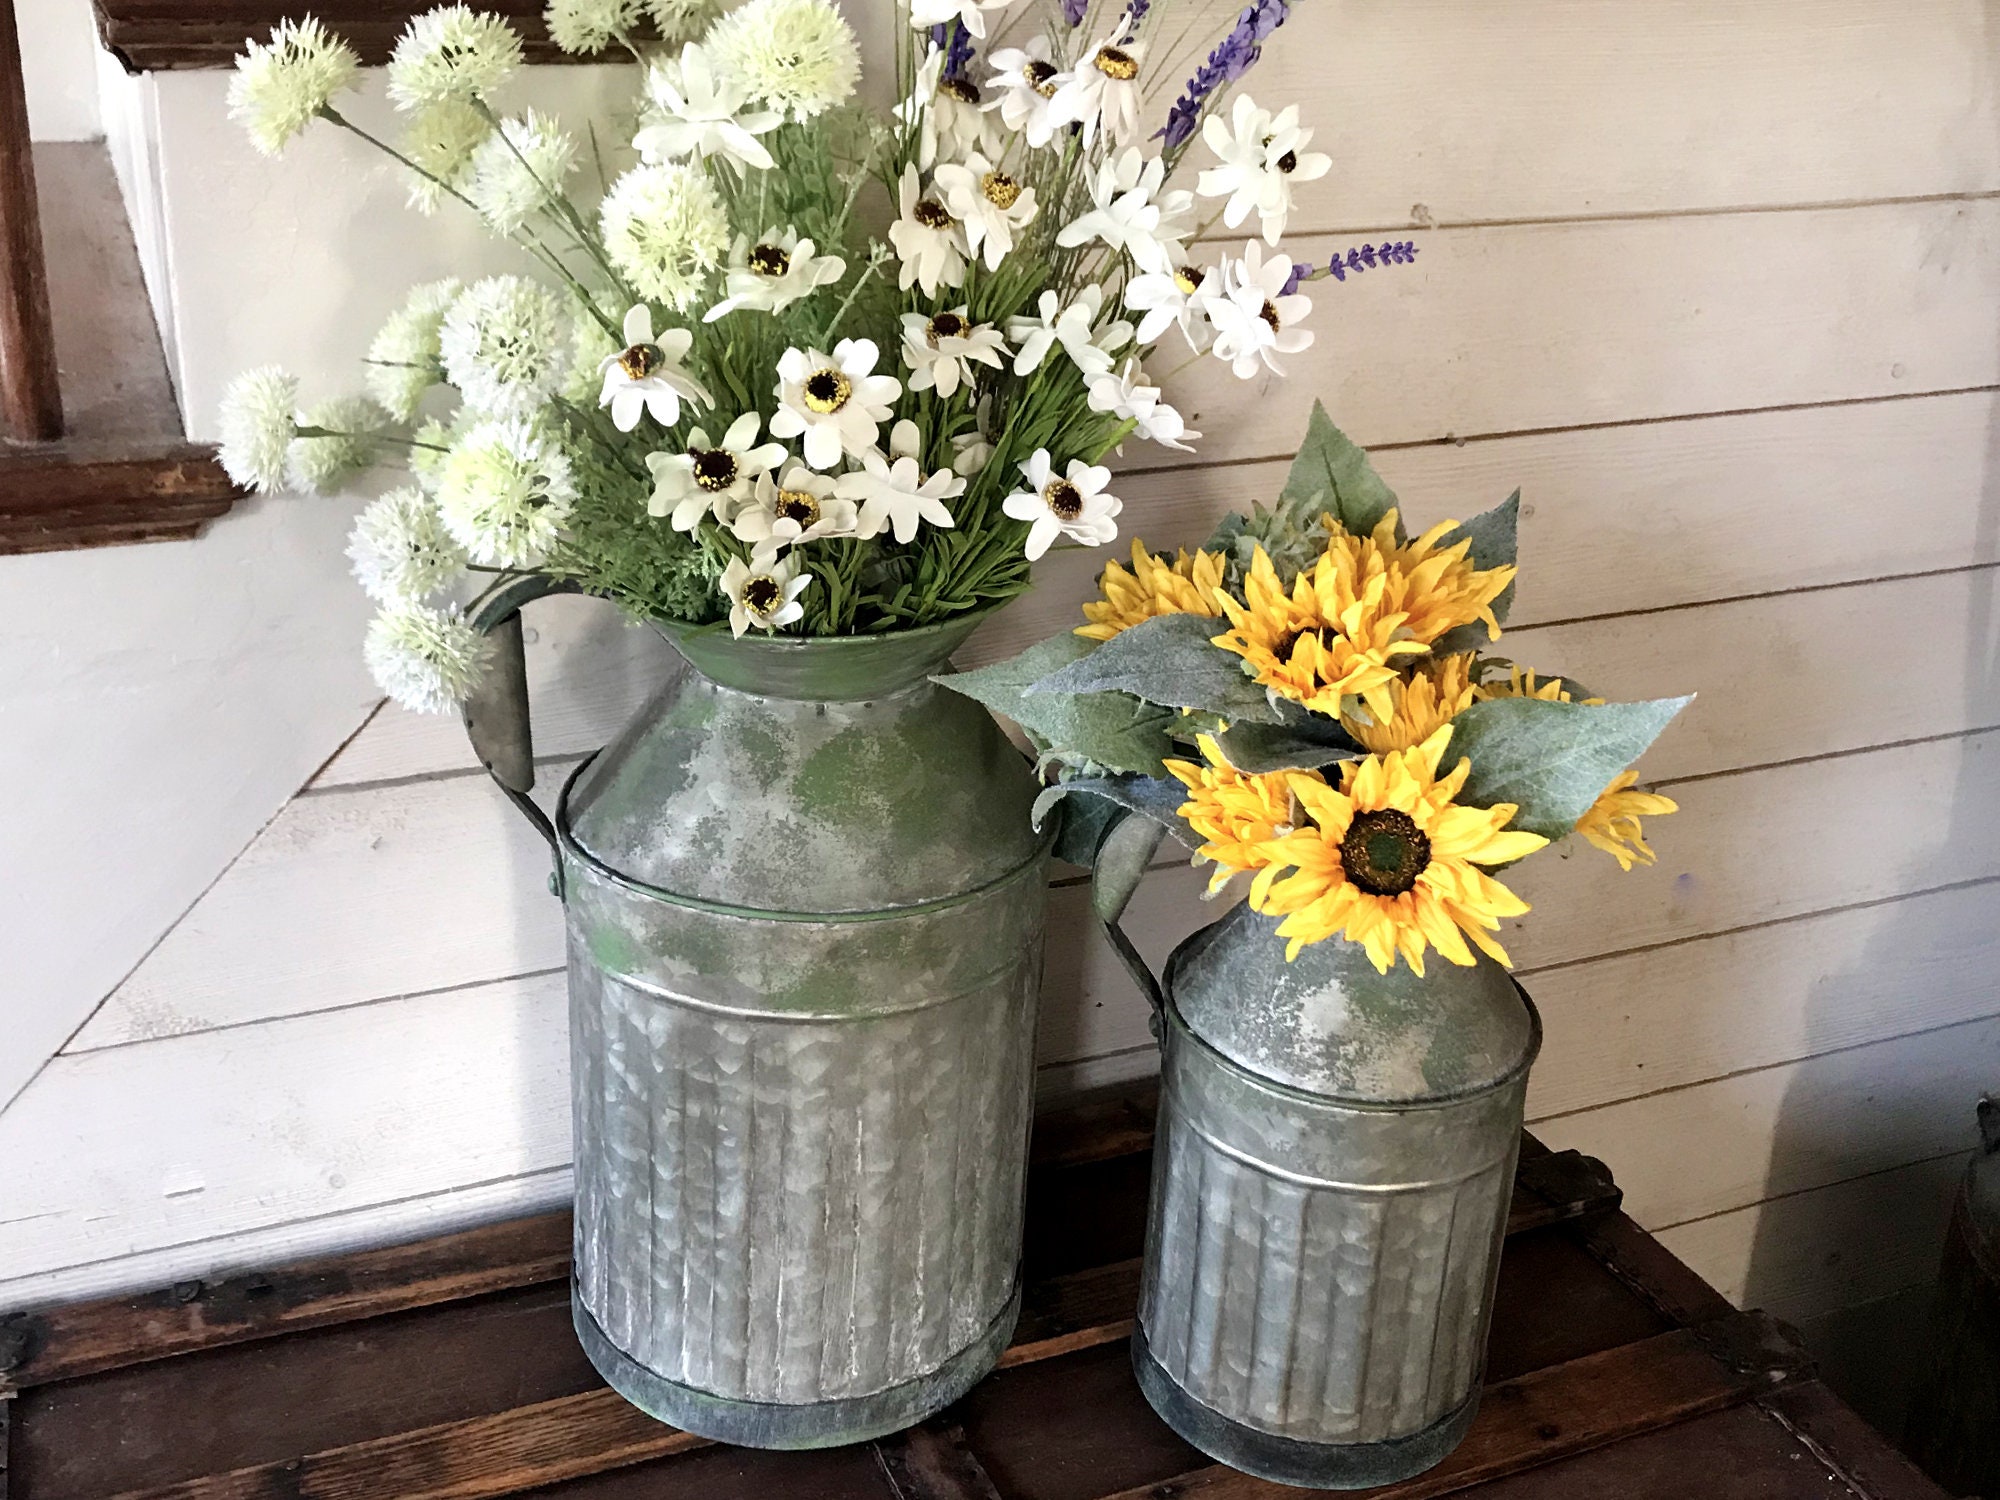 LIBWYS Metal Flower Vase Milk Can Rustic Style with Rose & Eucalyptus Shabby Chic Metal Vase for Rustic Home Dining Table Centerpieces Decor Champagne, 1 